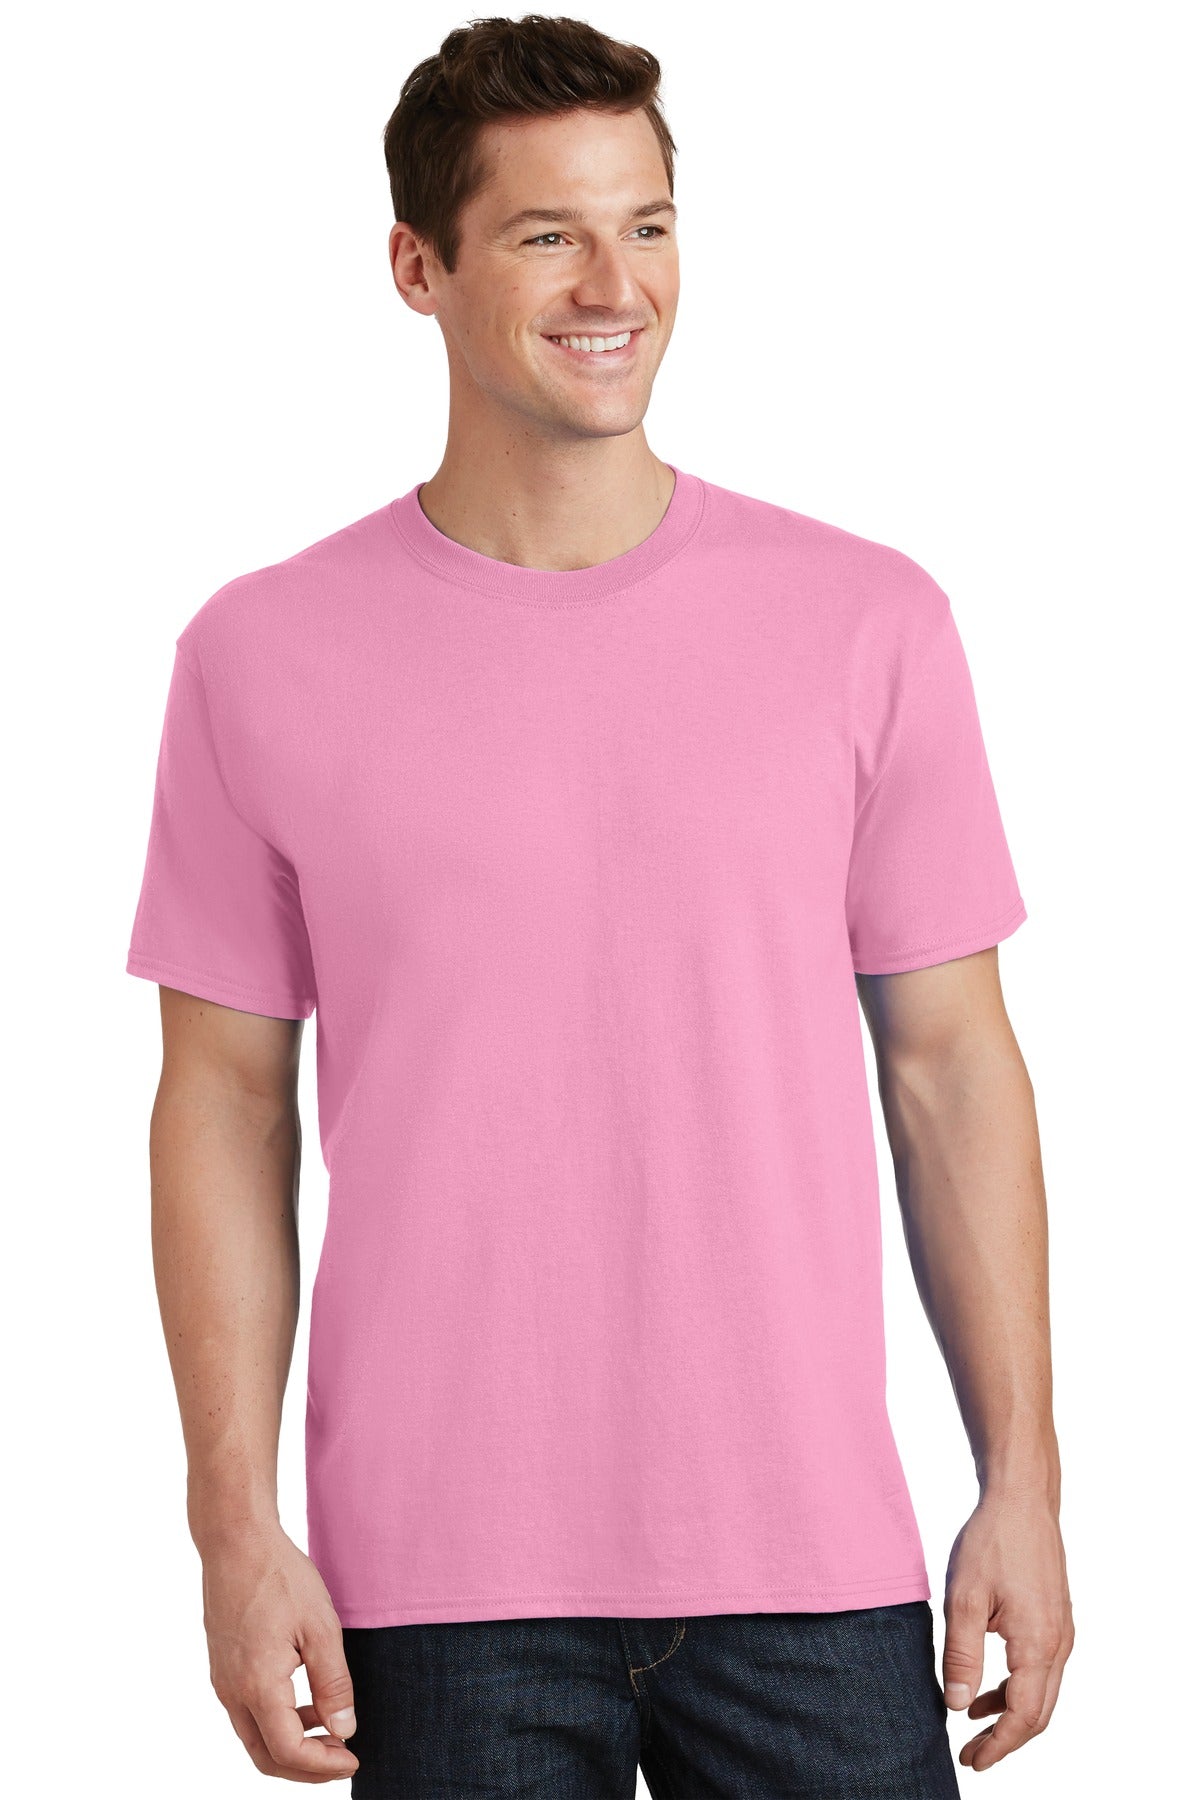 Port & Company® - Core Cotton Tee. PC54 [Candy Pink] - DFW Impression